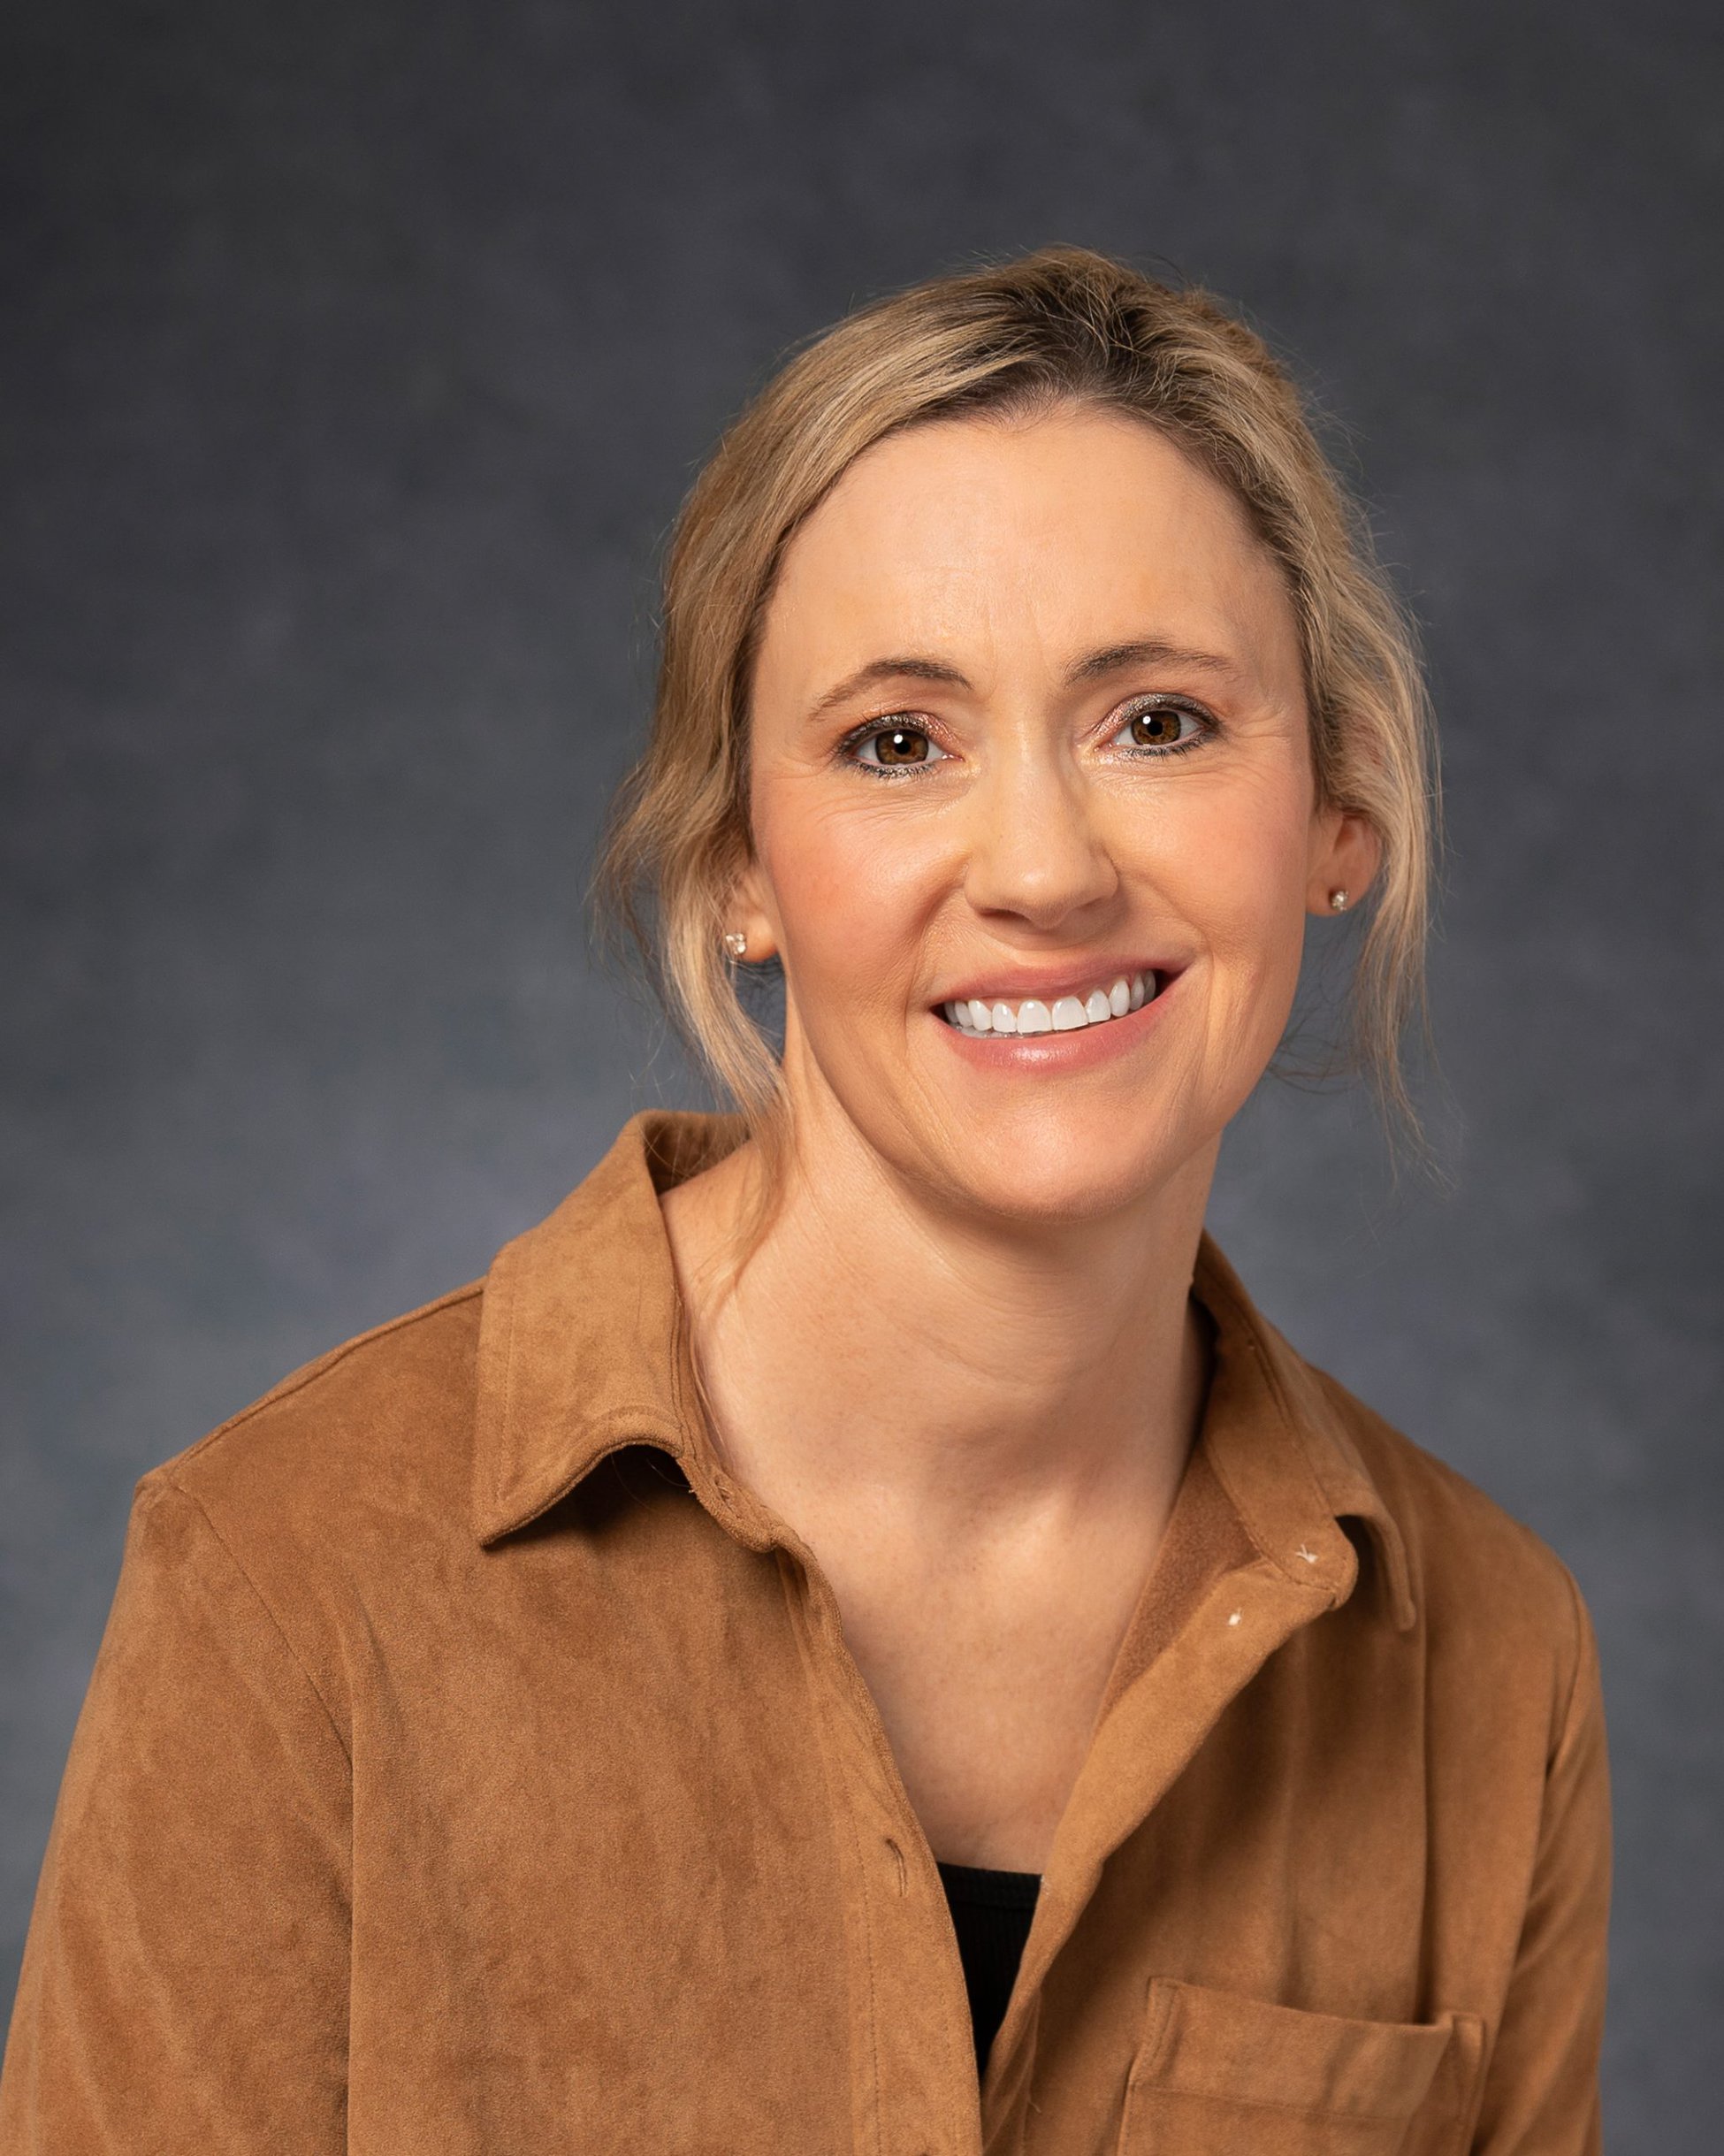 Small business owner smiling with a slight, empathetic tilt to her head. With short, dark blonde hair and brown eyes. Wearing black top and brown jacket set against a grey textured backdrop. 